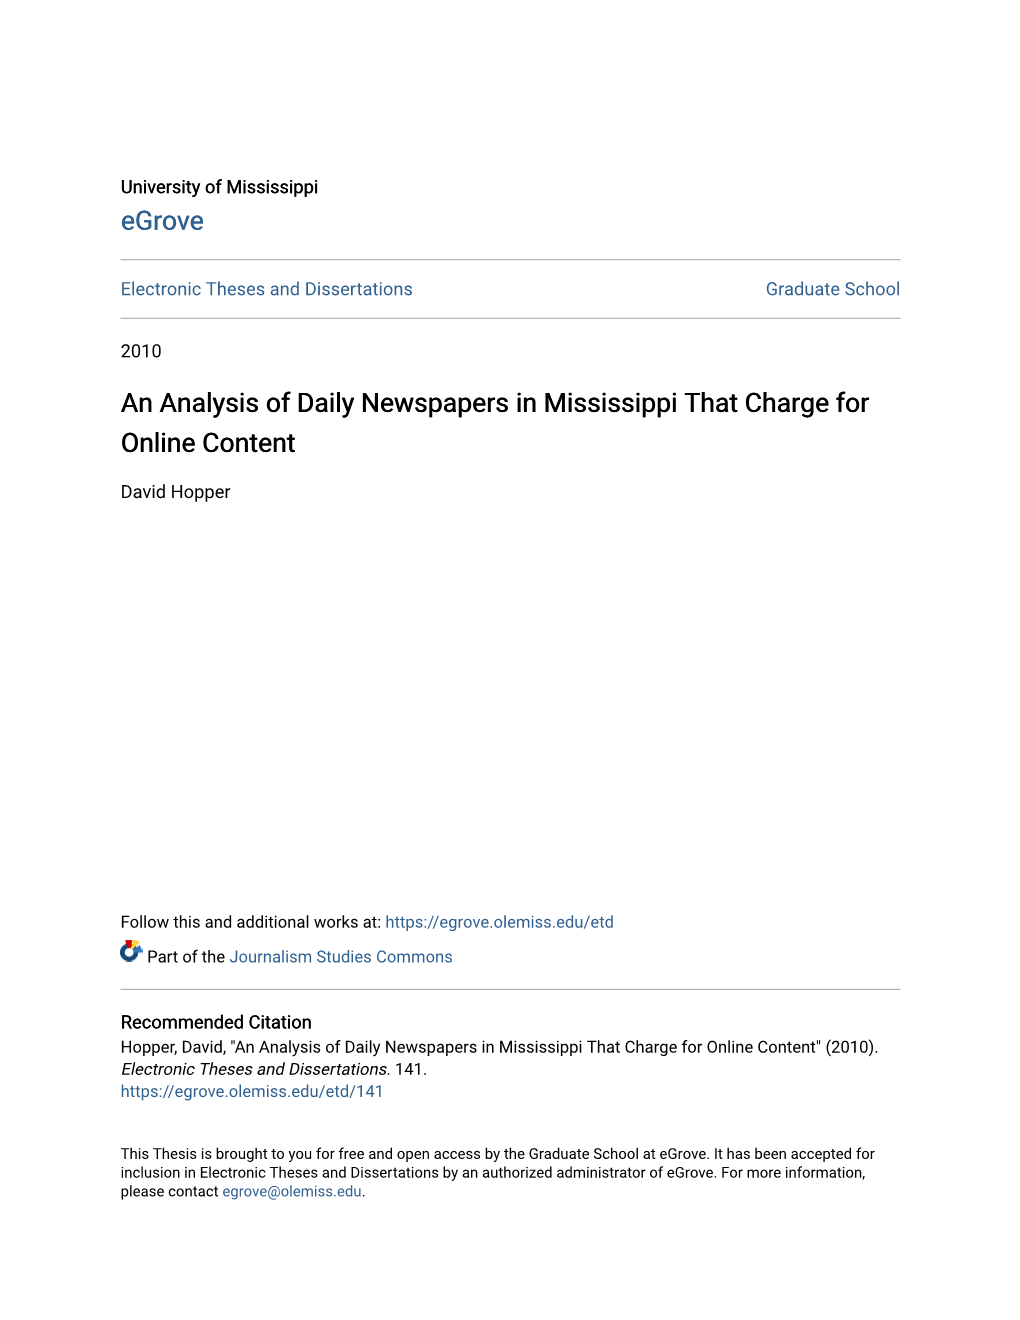 An Analysis of Daily Newspapers in Mississippi That Charge for Online Content